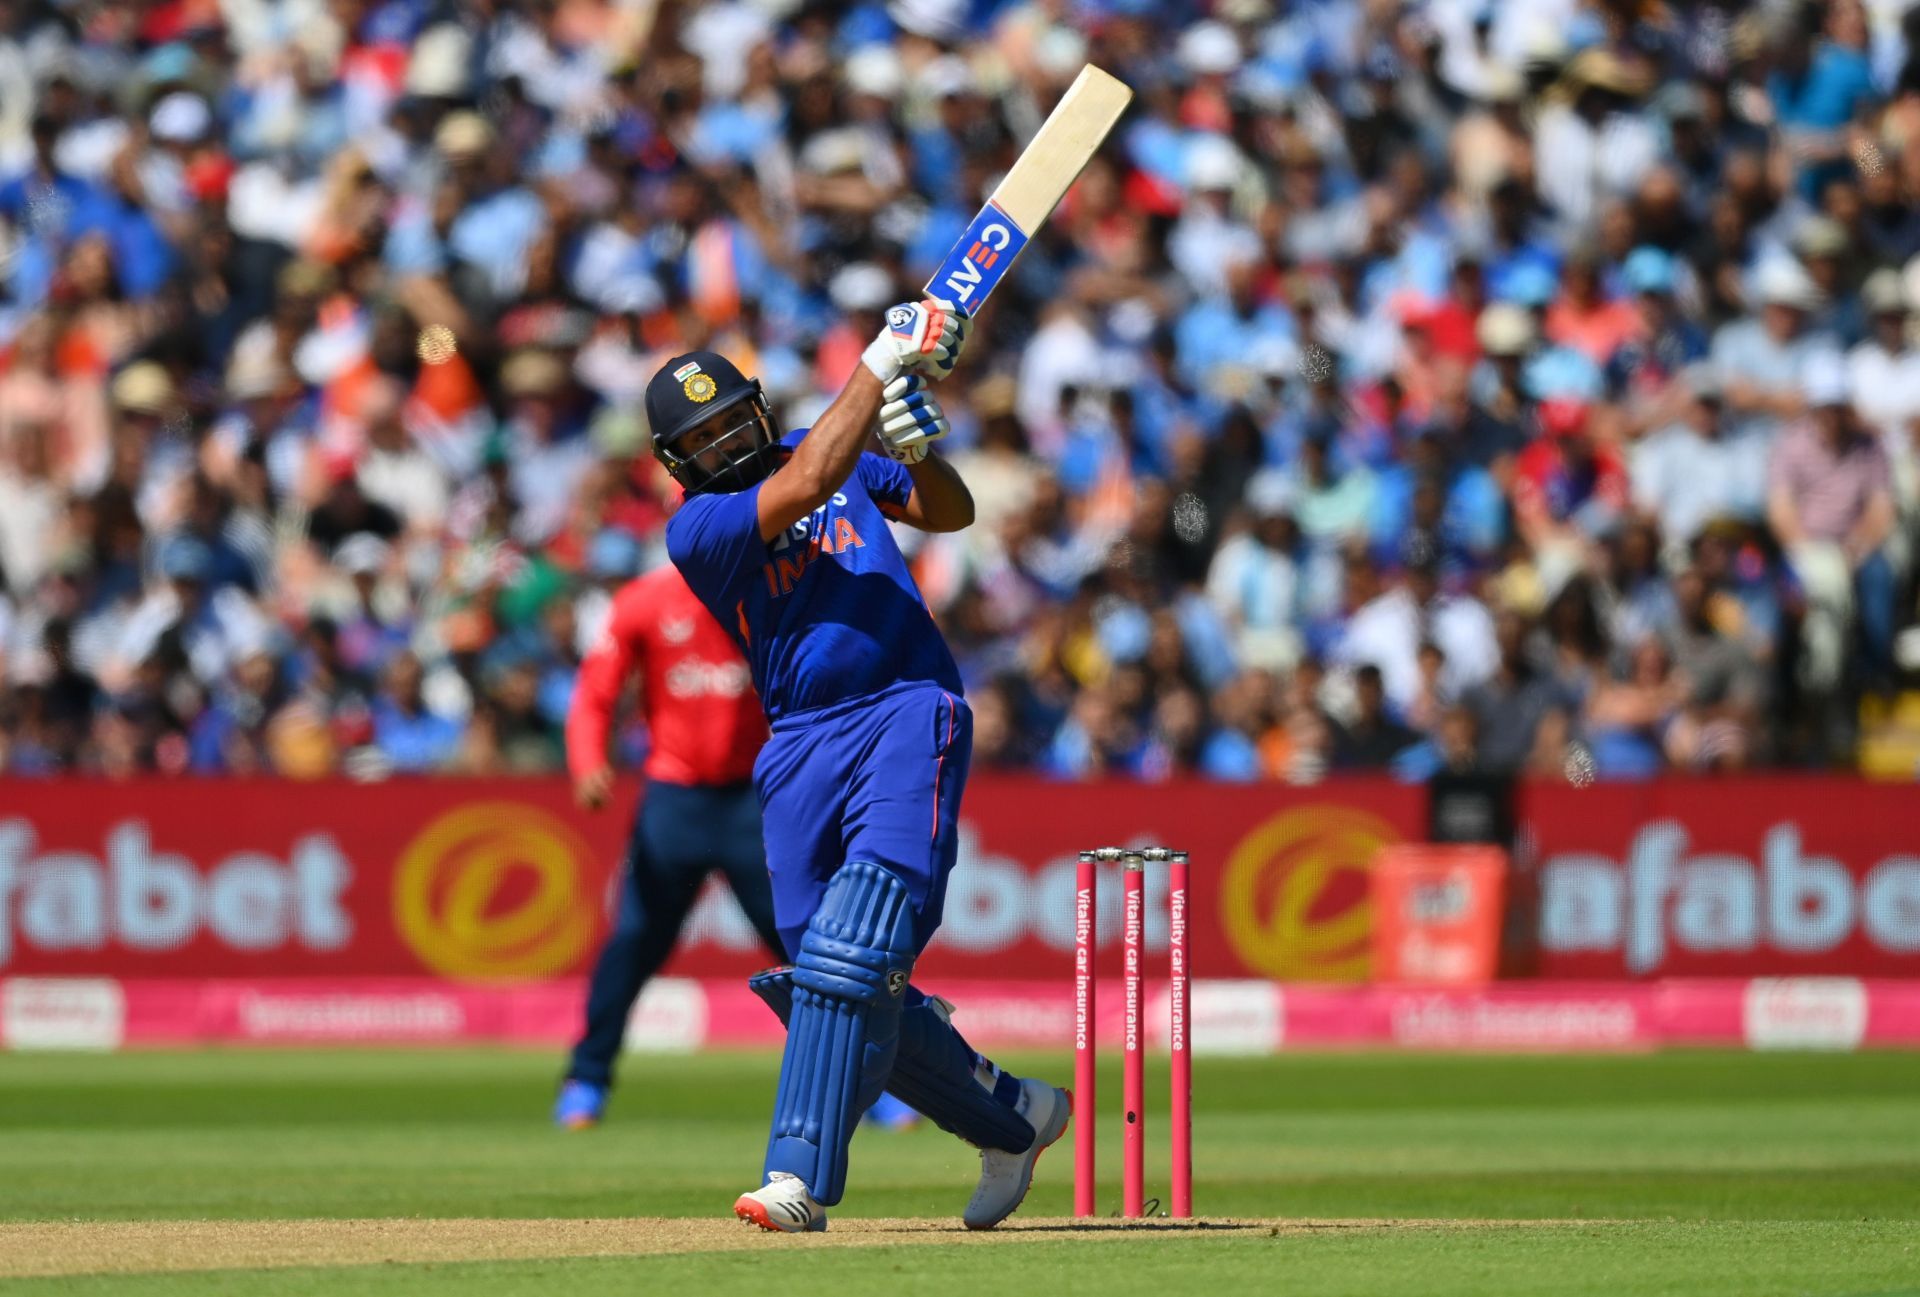 Rohit Sharma will aim to fire with the bat in the powerplay. 